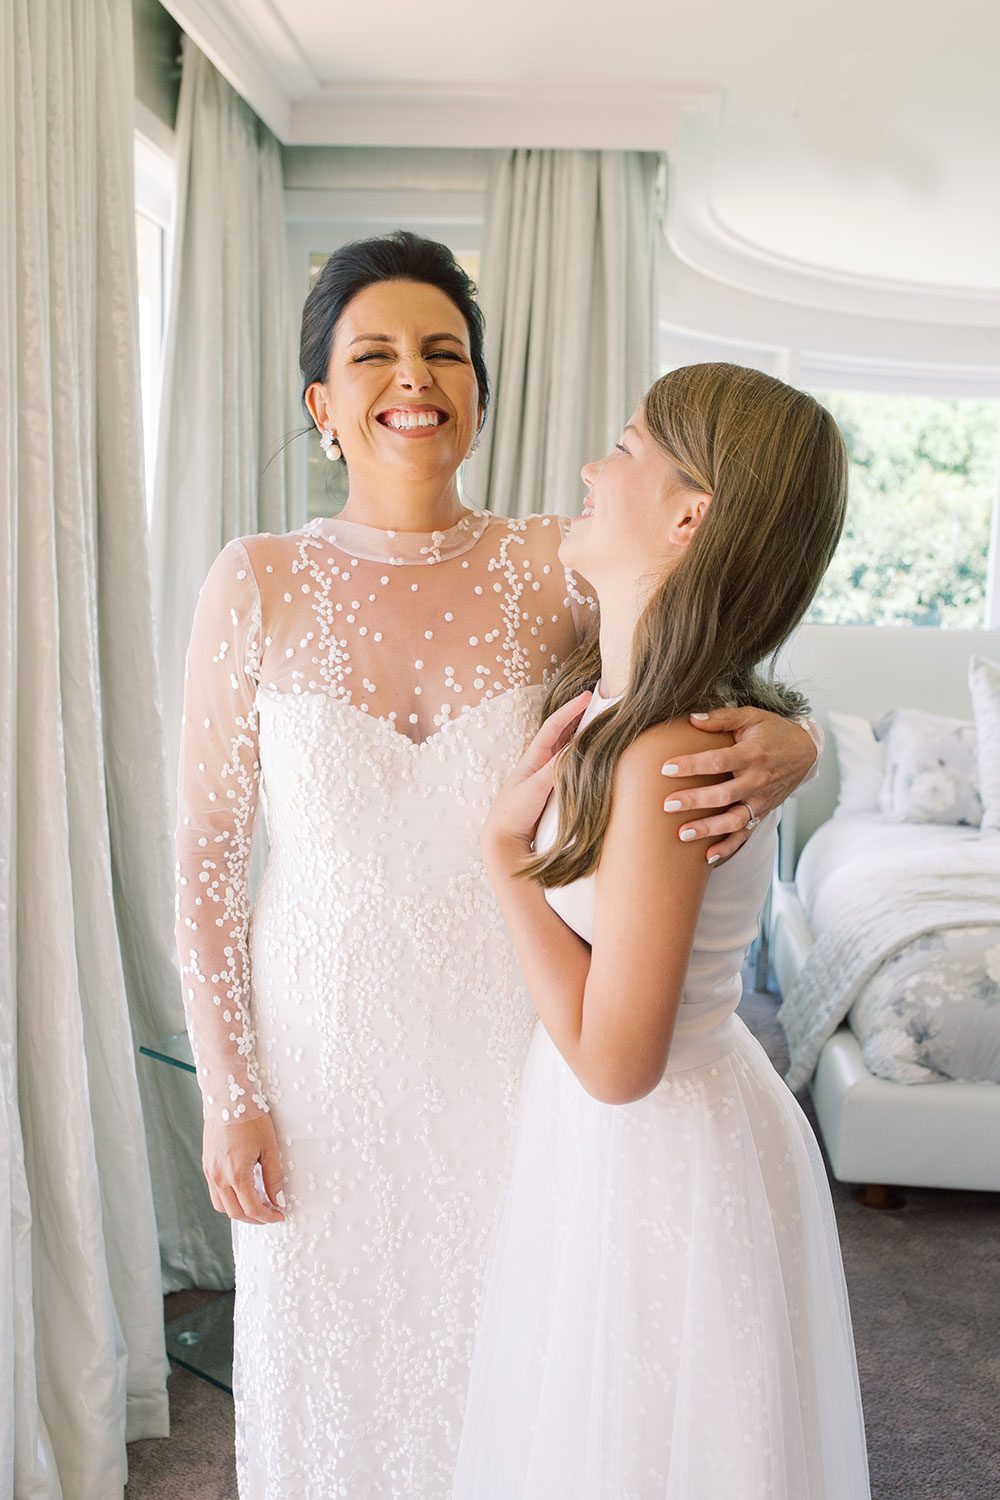 Bride wearing bespoke gown by Auckland wedding dress designer Vinka Design, with a high neckline and delicate spotted embroidery - bride and bridesmaid laughing